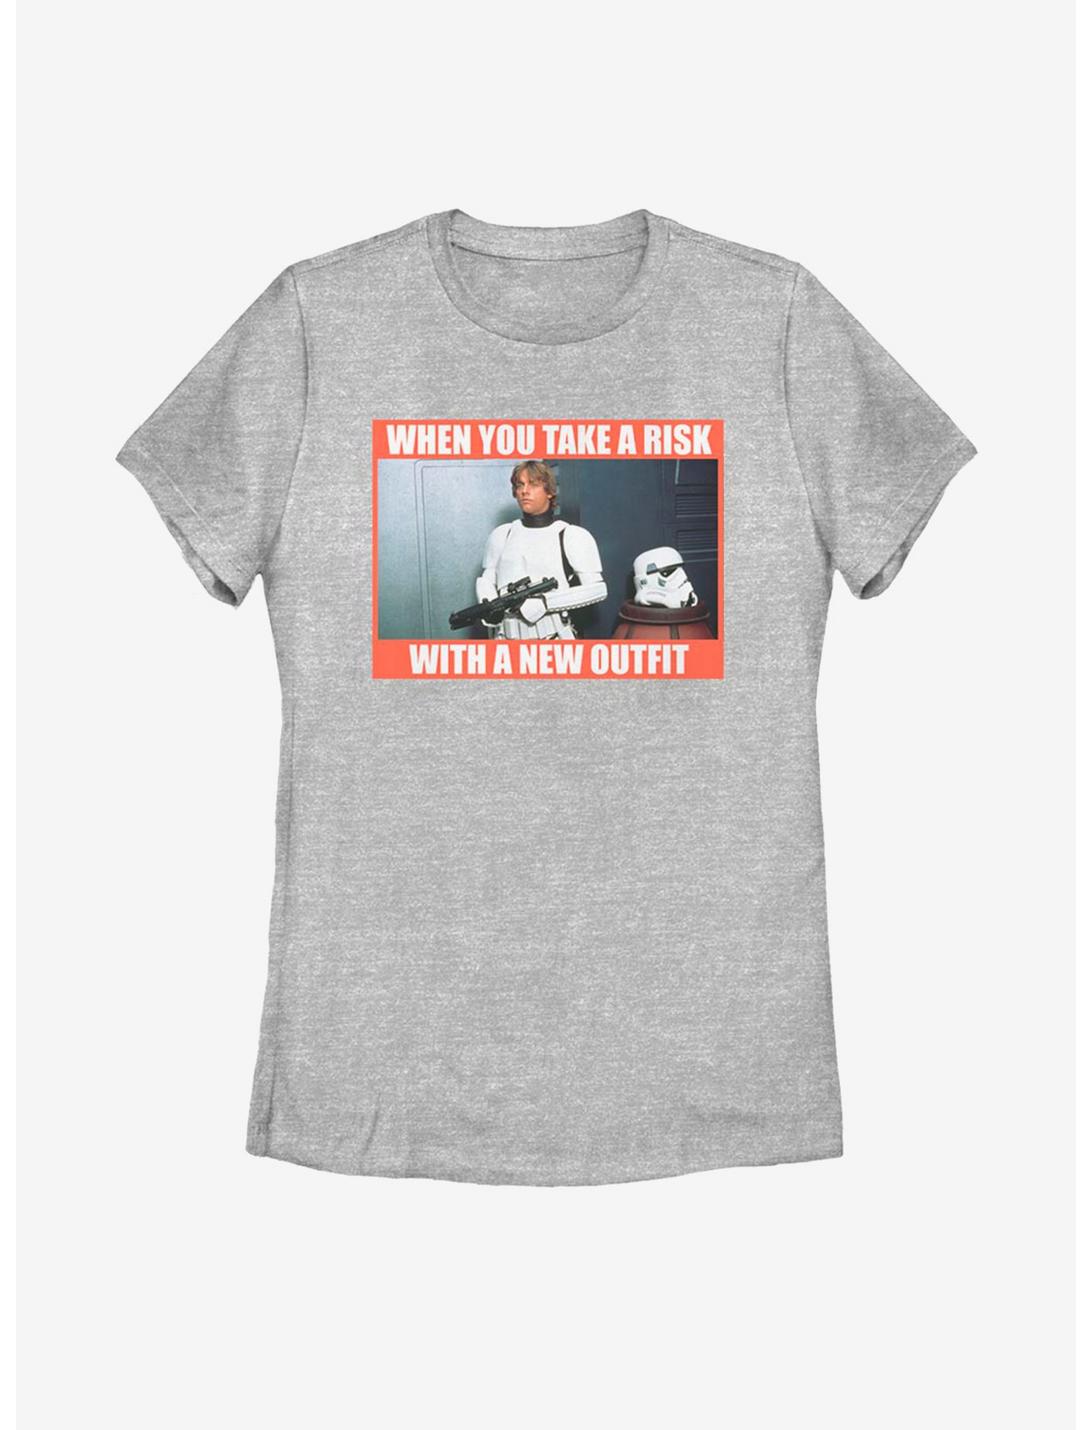 Star Wars Risky New Outfit Womens T-Shirt, ATH HTR, hi-res